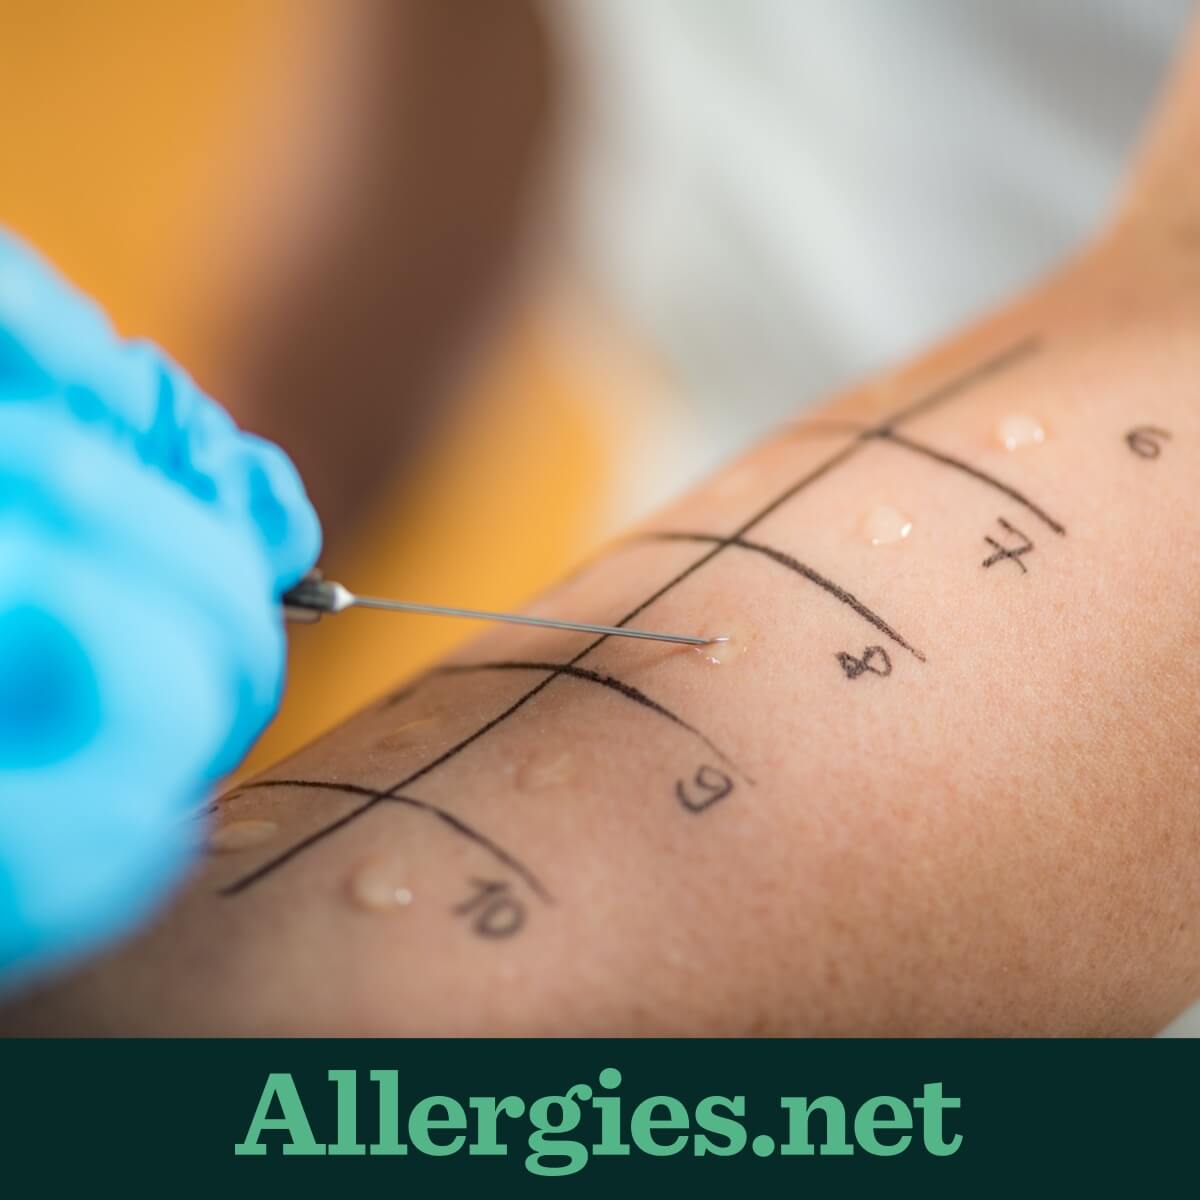 For a skin prick test a small amount of a possible allergen is dropped on the skin. A needle is then used to gently prick the site. There is no bleeding. The site is checked after 15 minutes for signs of an allergic reaction. Reactions include itching, and a raised, red bump. 